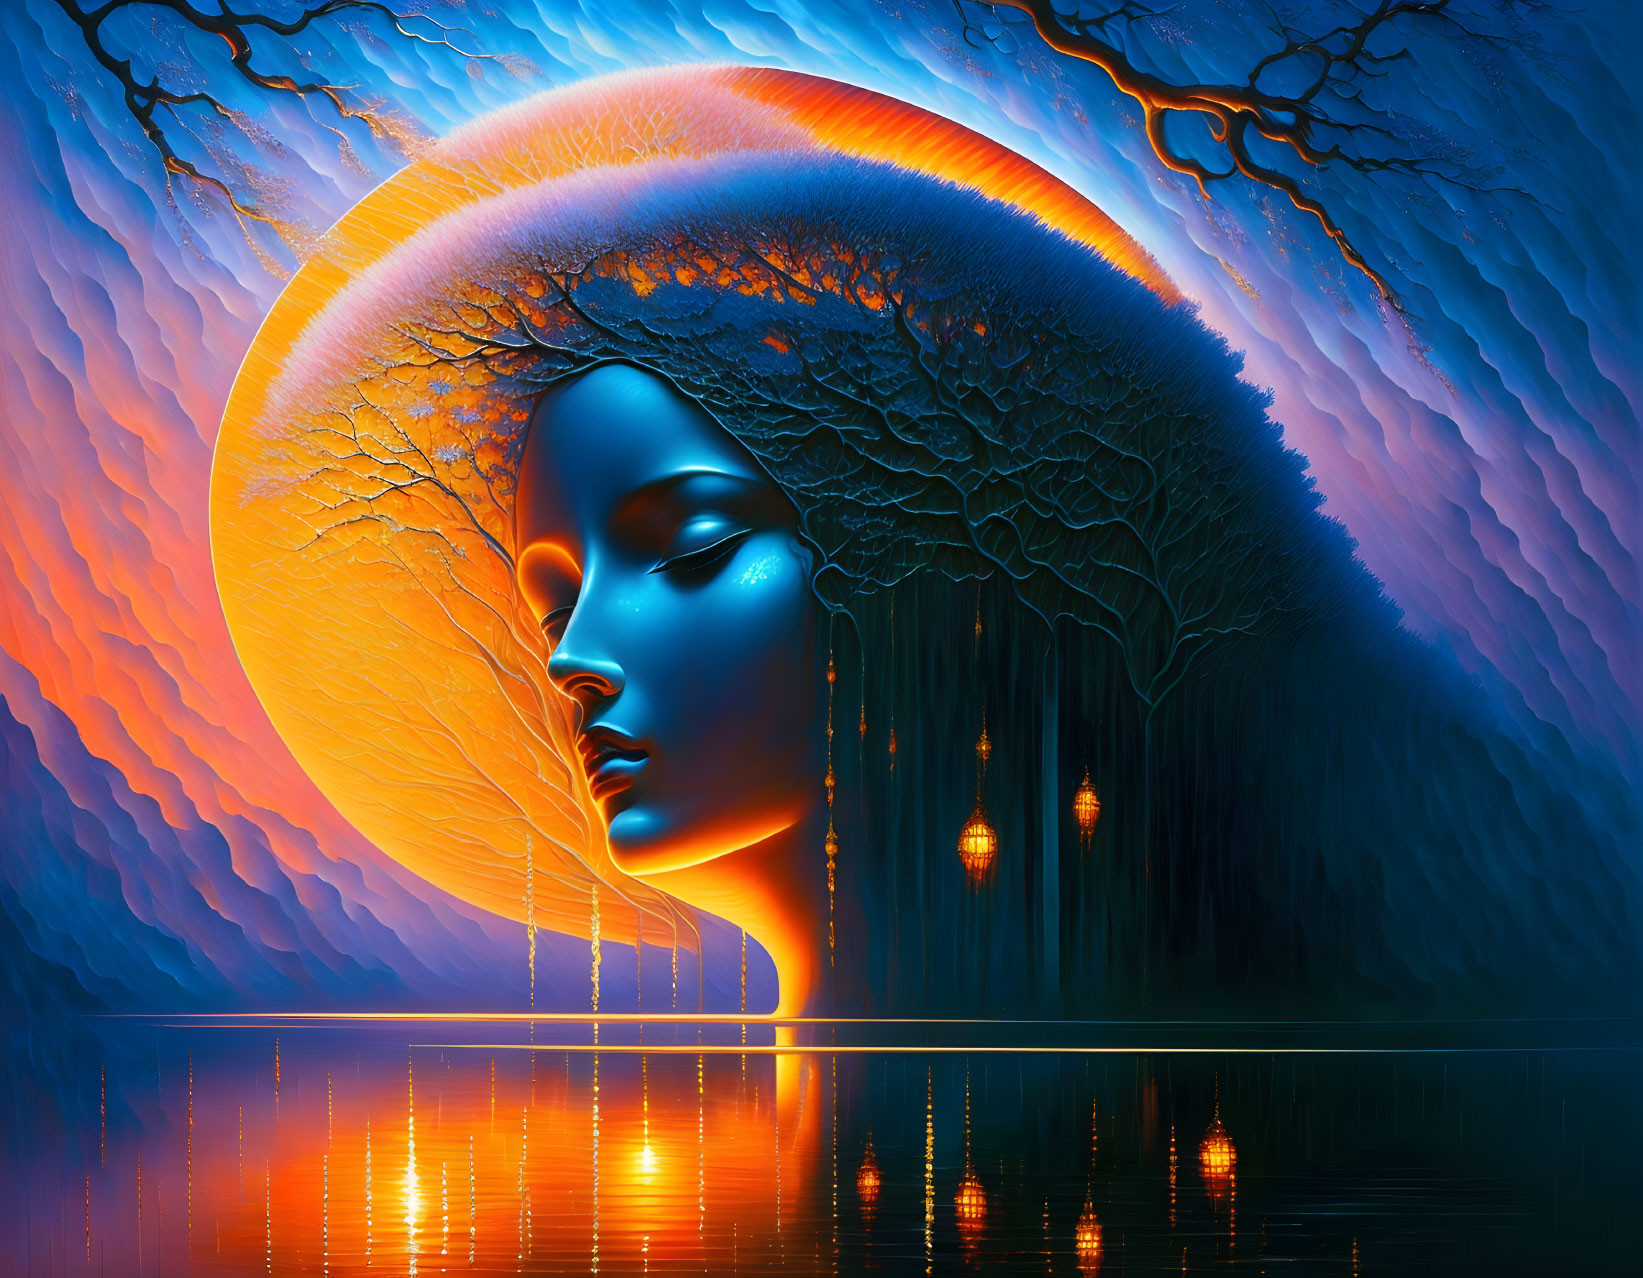 Colorful female face profile with tree silhouette at sunset reflected in water